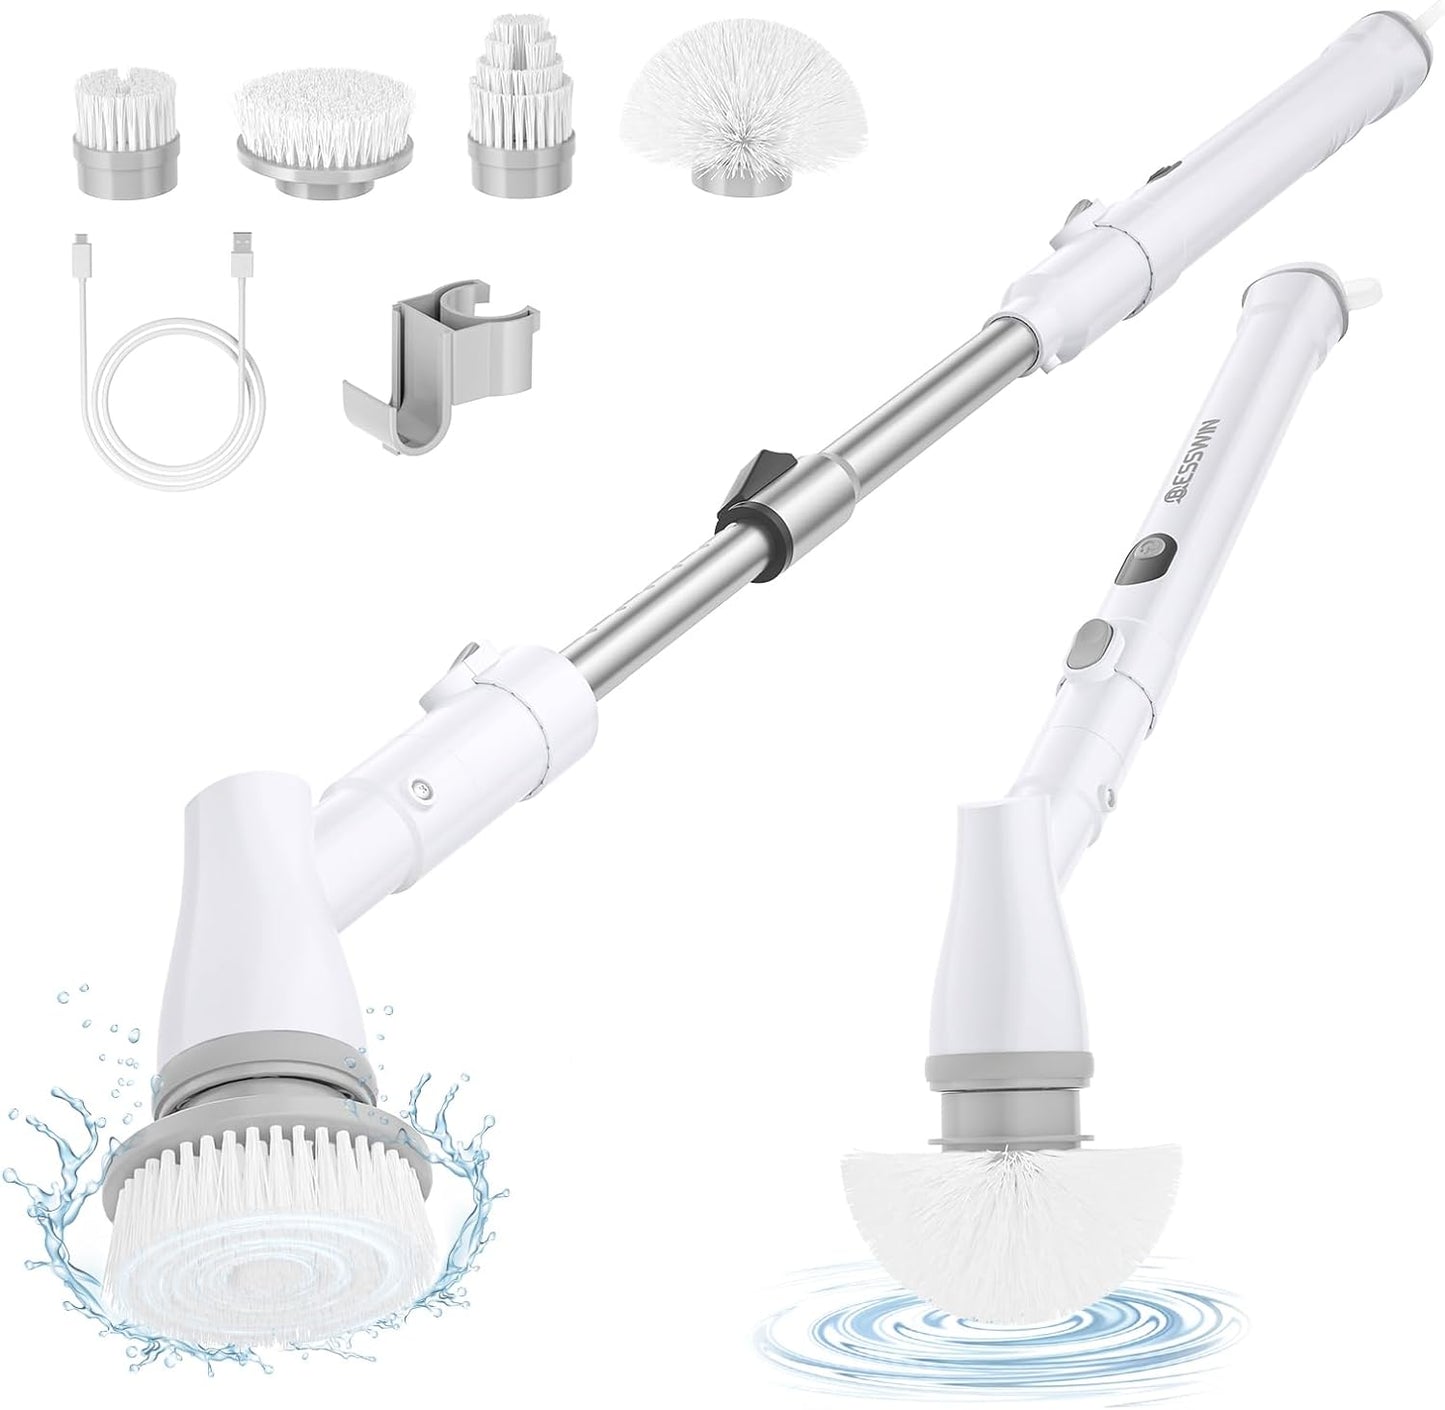 Home Spin Scrubber Electric Brush Floor Cordless Electric Bathroom